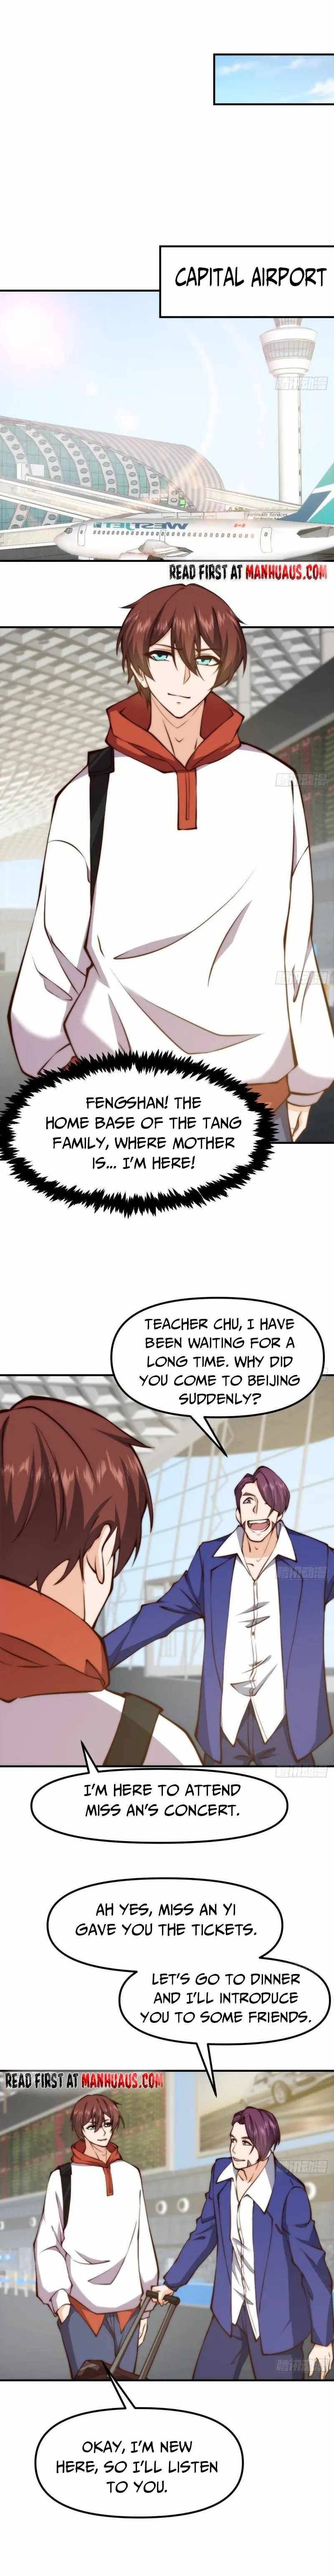 Cultivation Return on Campus Chapter 407 page 3